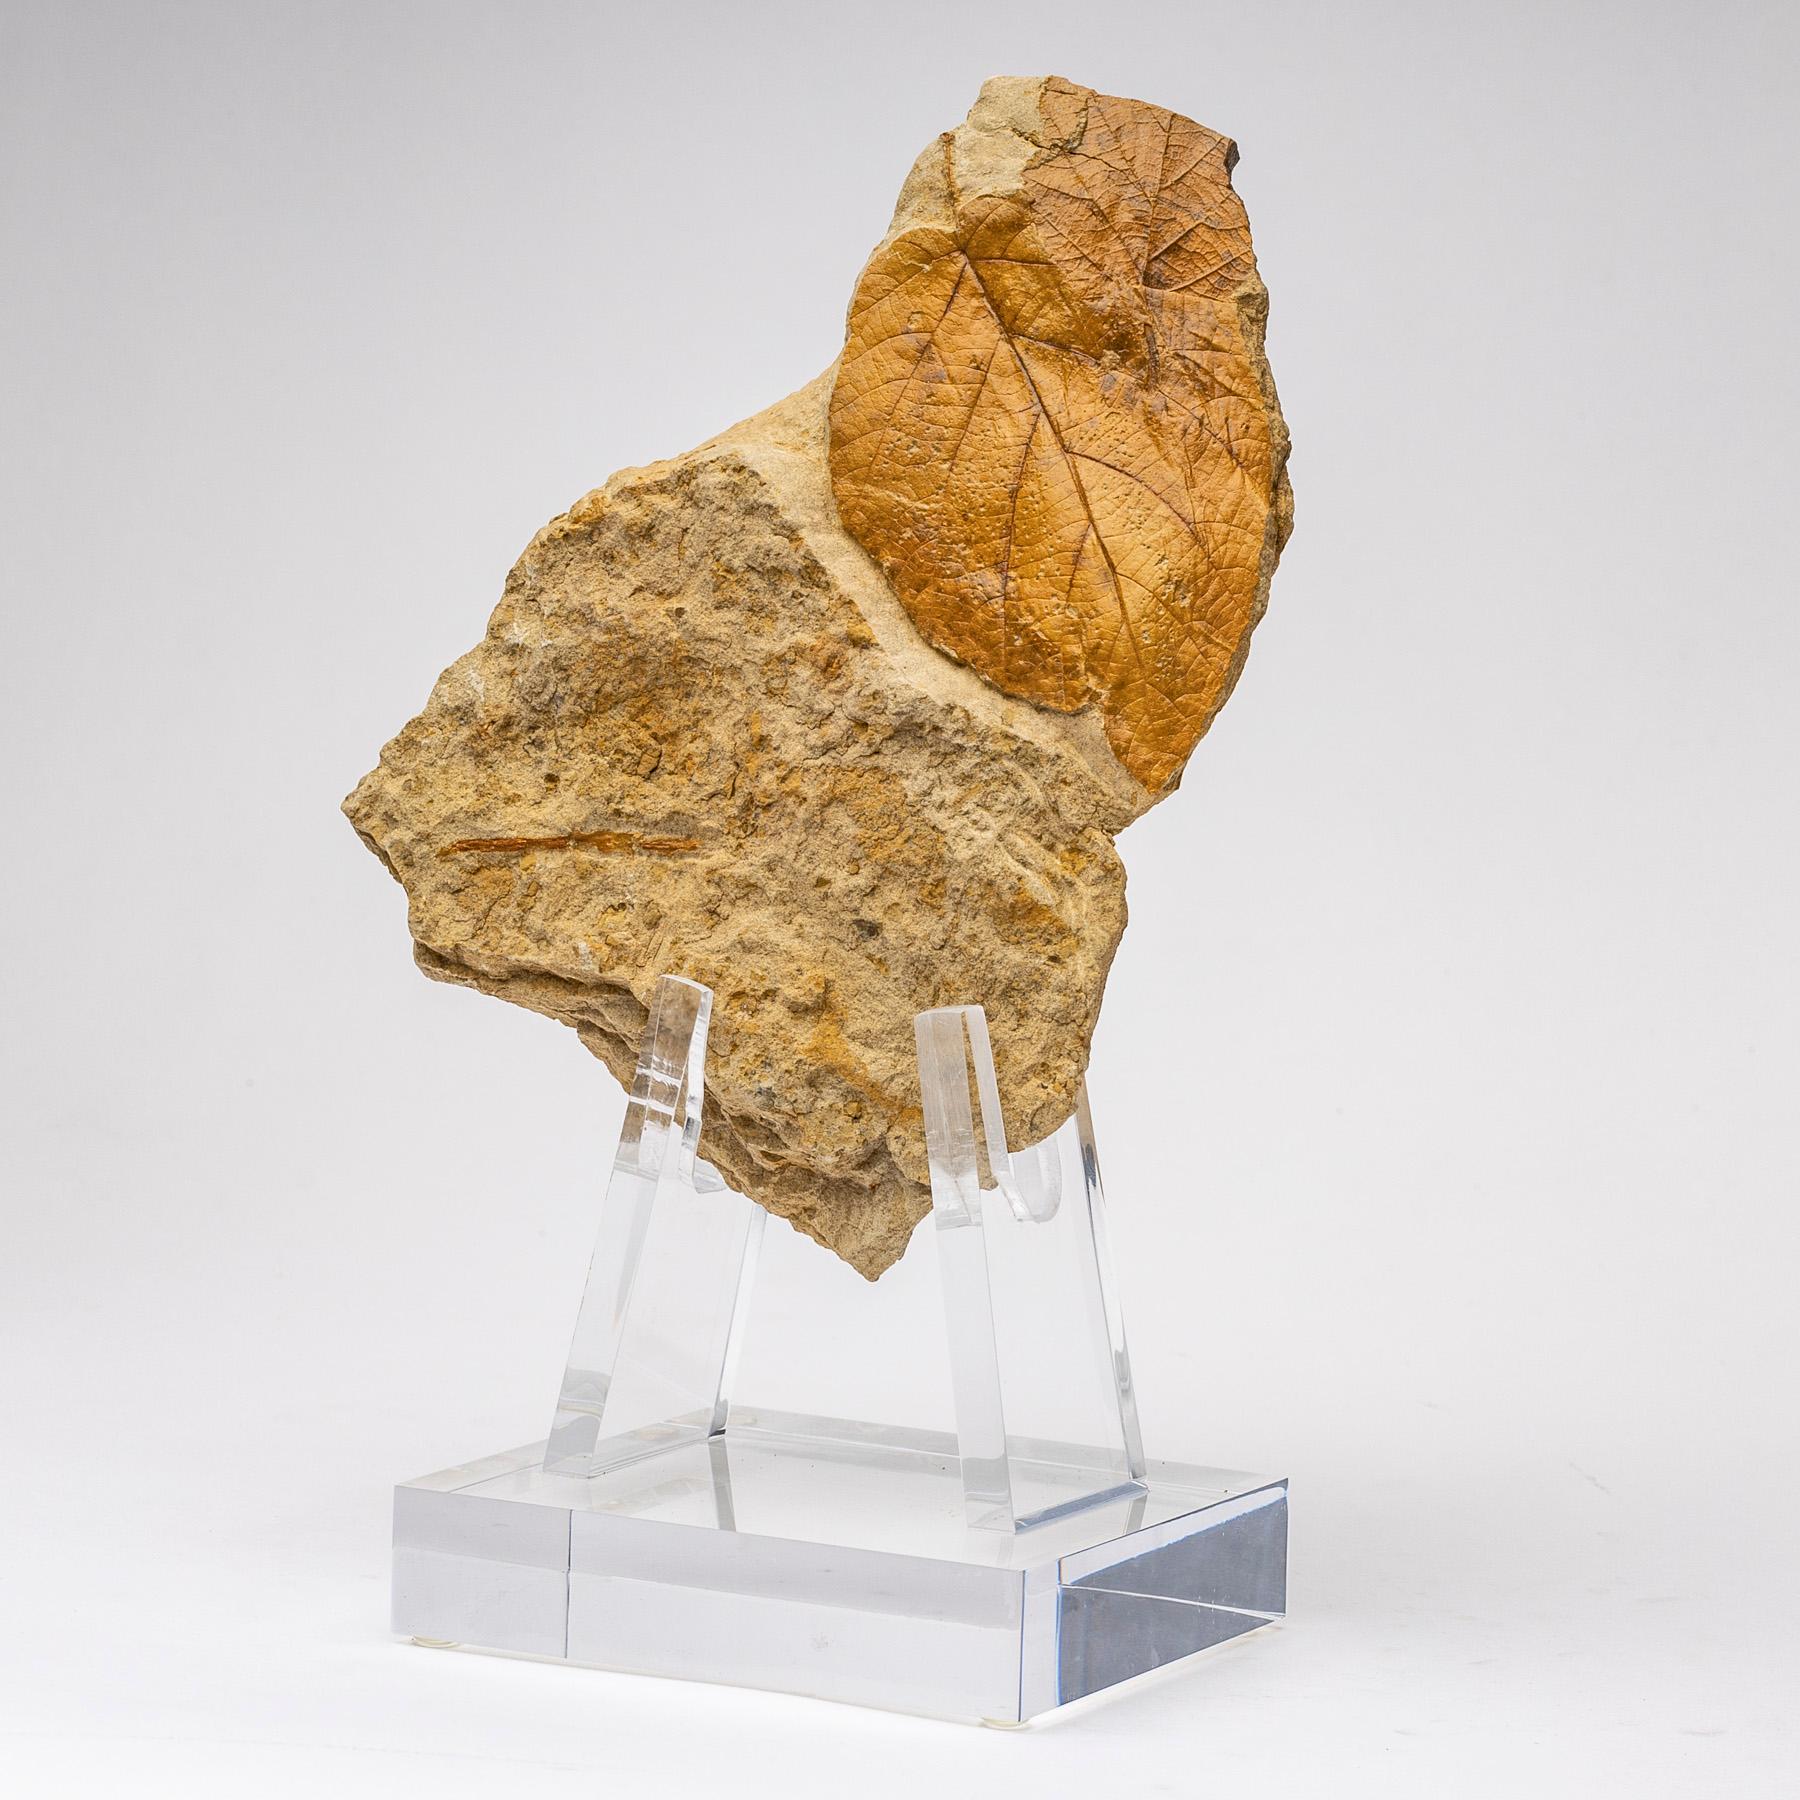 Beautiful and detailed fossil leaves from Arkansas, USA dating 50-55 million years old from the Eocene period.
Mounted on a custom acrylic stand.